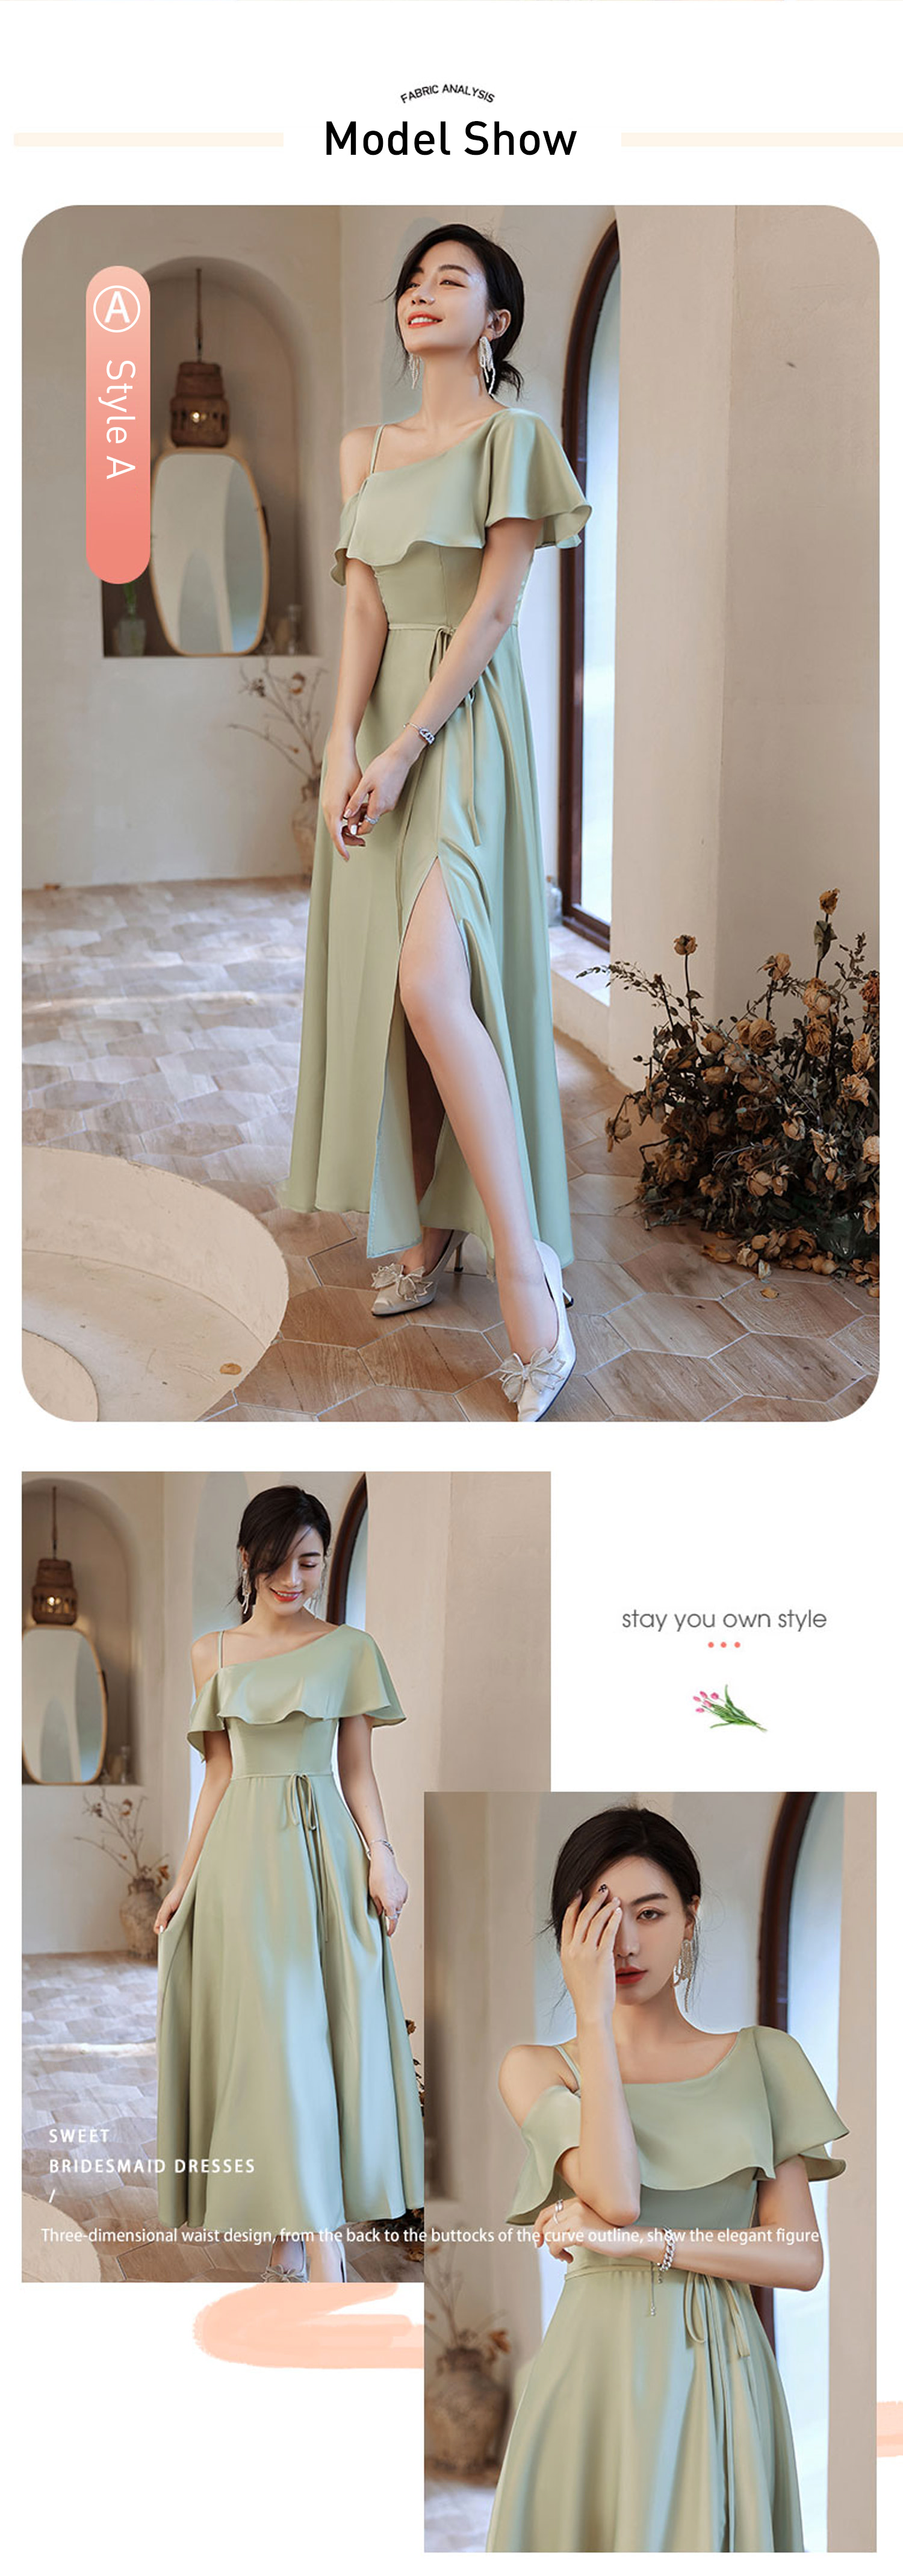 Simple-Olive-Green-Satin-Bridesmaid-Dress-Beach-Wedding-Guest-Outfit15